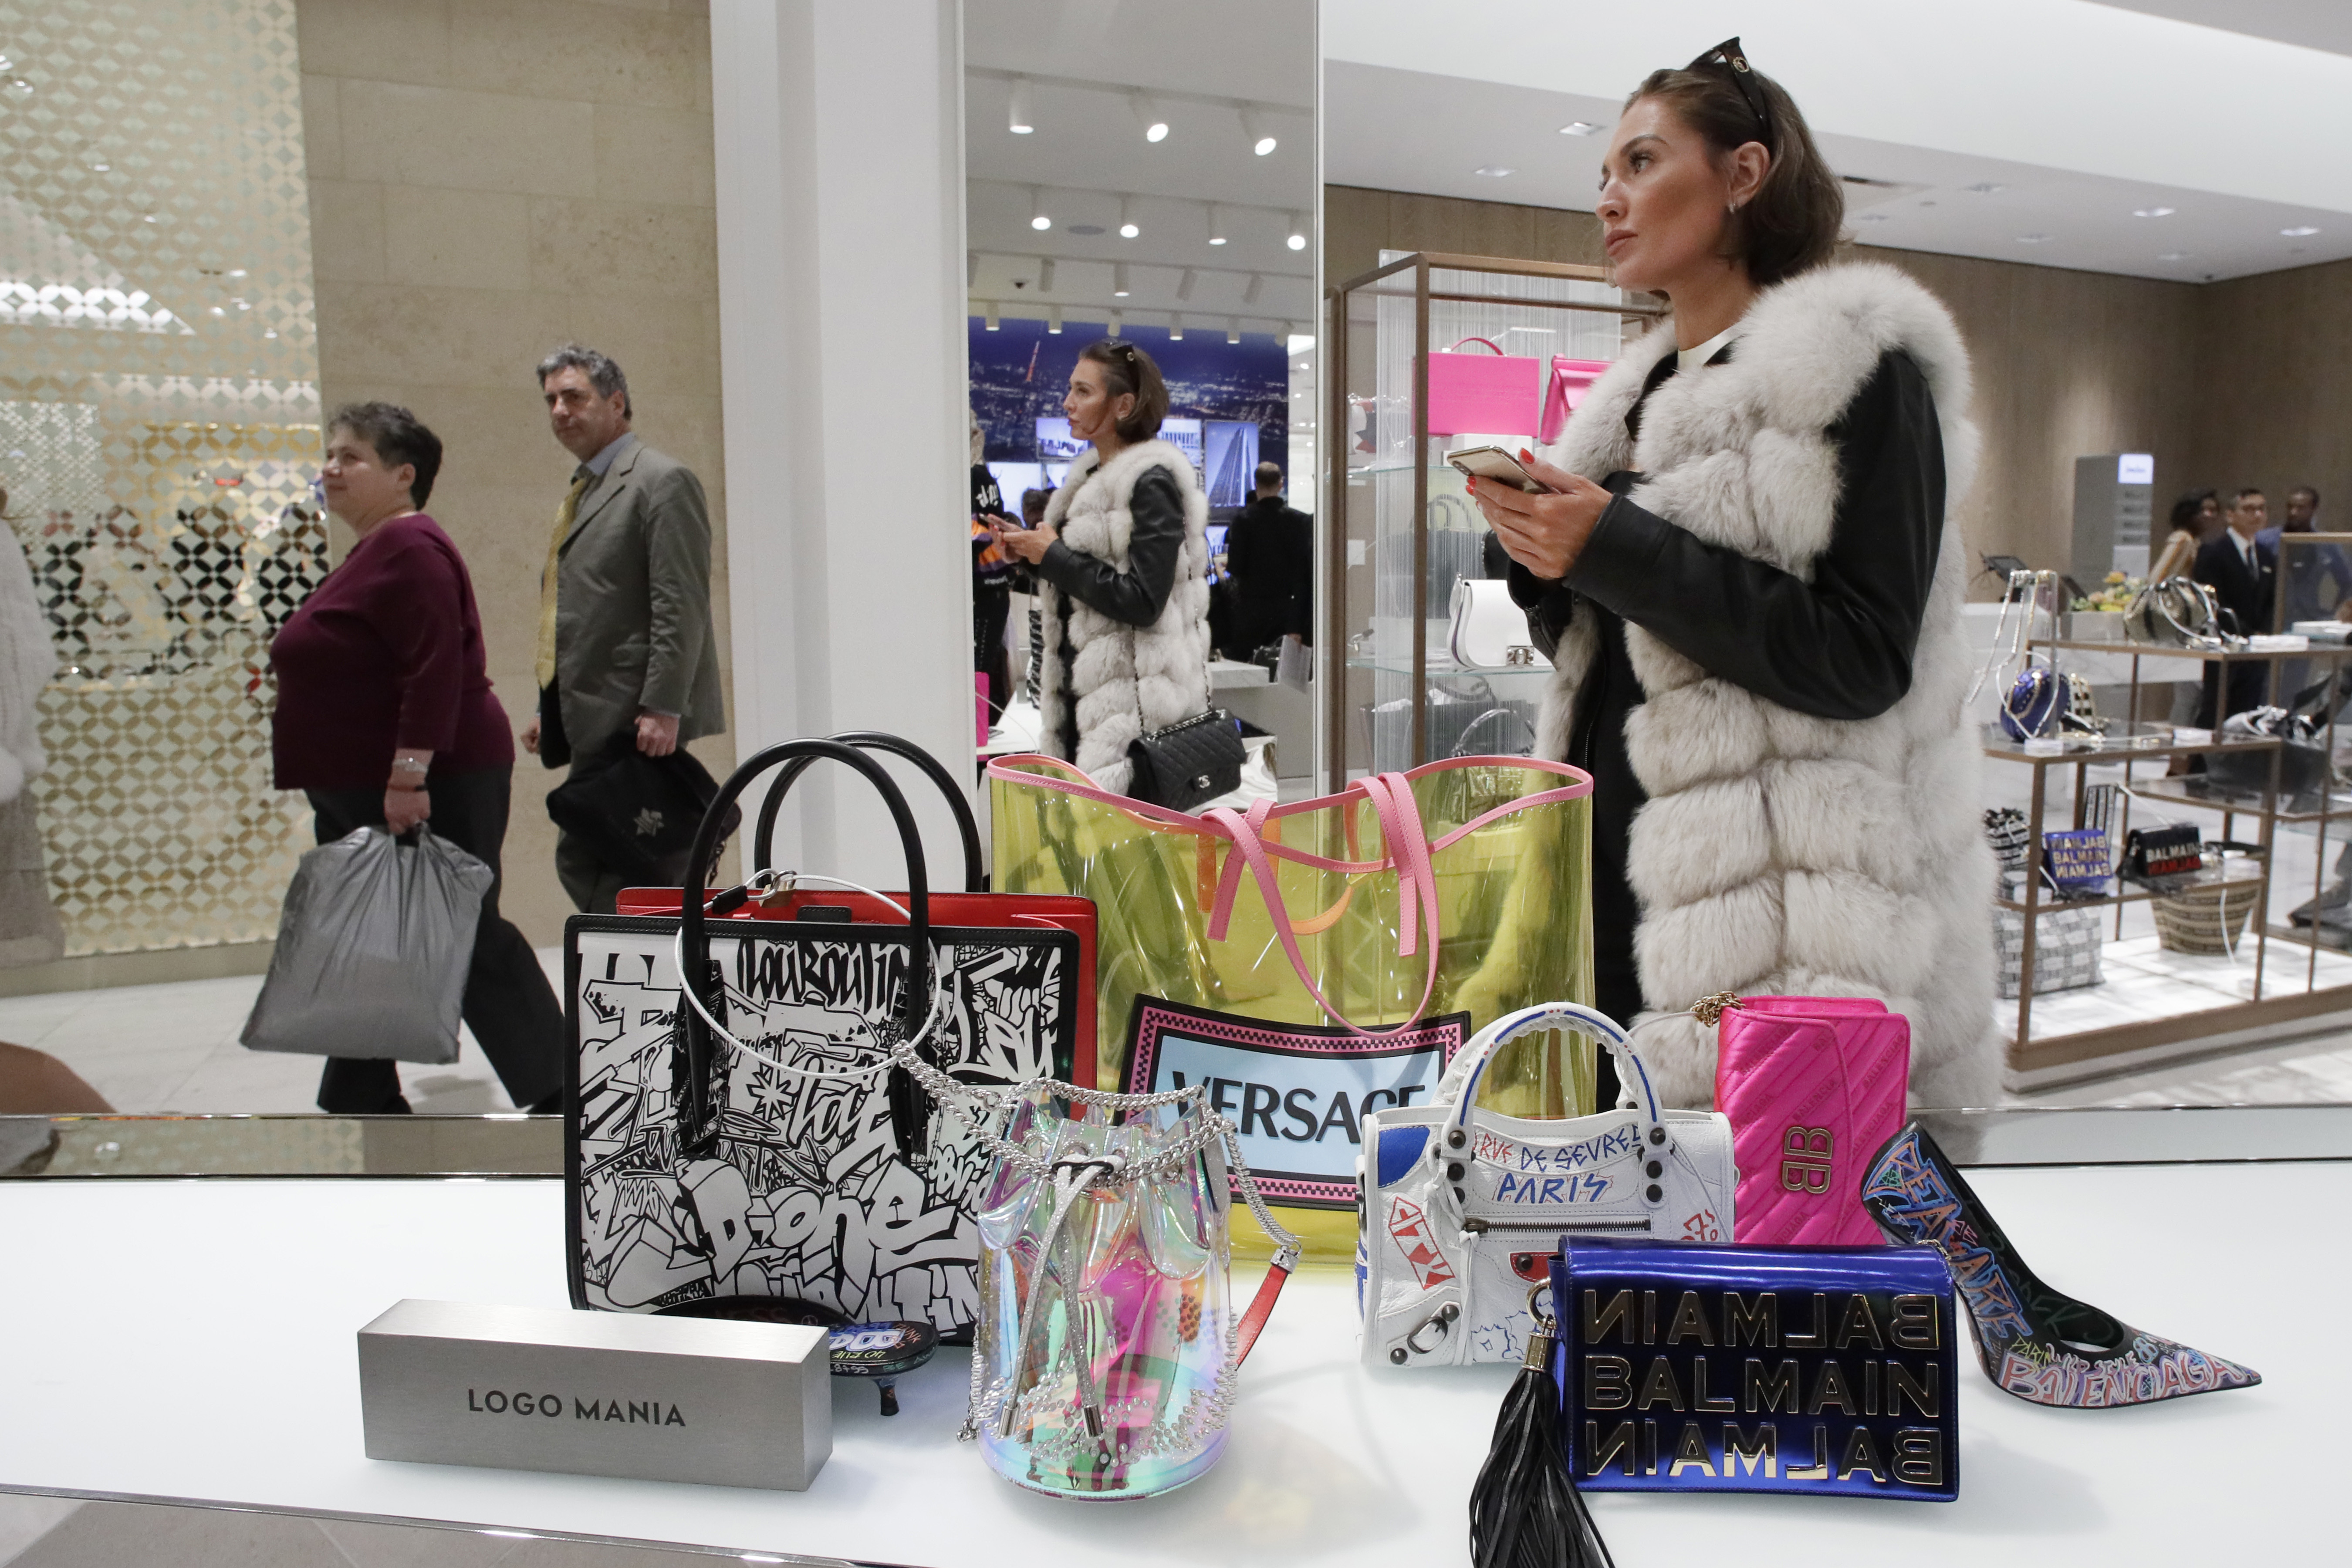 A woman shops at Neiman Marcus during the opening night of The Shops & Restaurants at Hudson Yards, Thursday, March 14, 2019, in New York. Hudson Yards, a $25 billion urban complex on Manhattan's west side, is the city's most ambitious development since the rebuilding of the World Trade Center. When fully complete, the 28-acre site will include 16 towers of homes and offices, a hotel, a school, the highest outdoor observation deck in the Western Hemisphere, a performing arts center and the shopping mall. (AP Photo/Mark Lennihan)